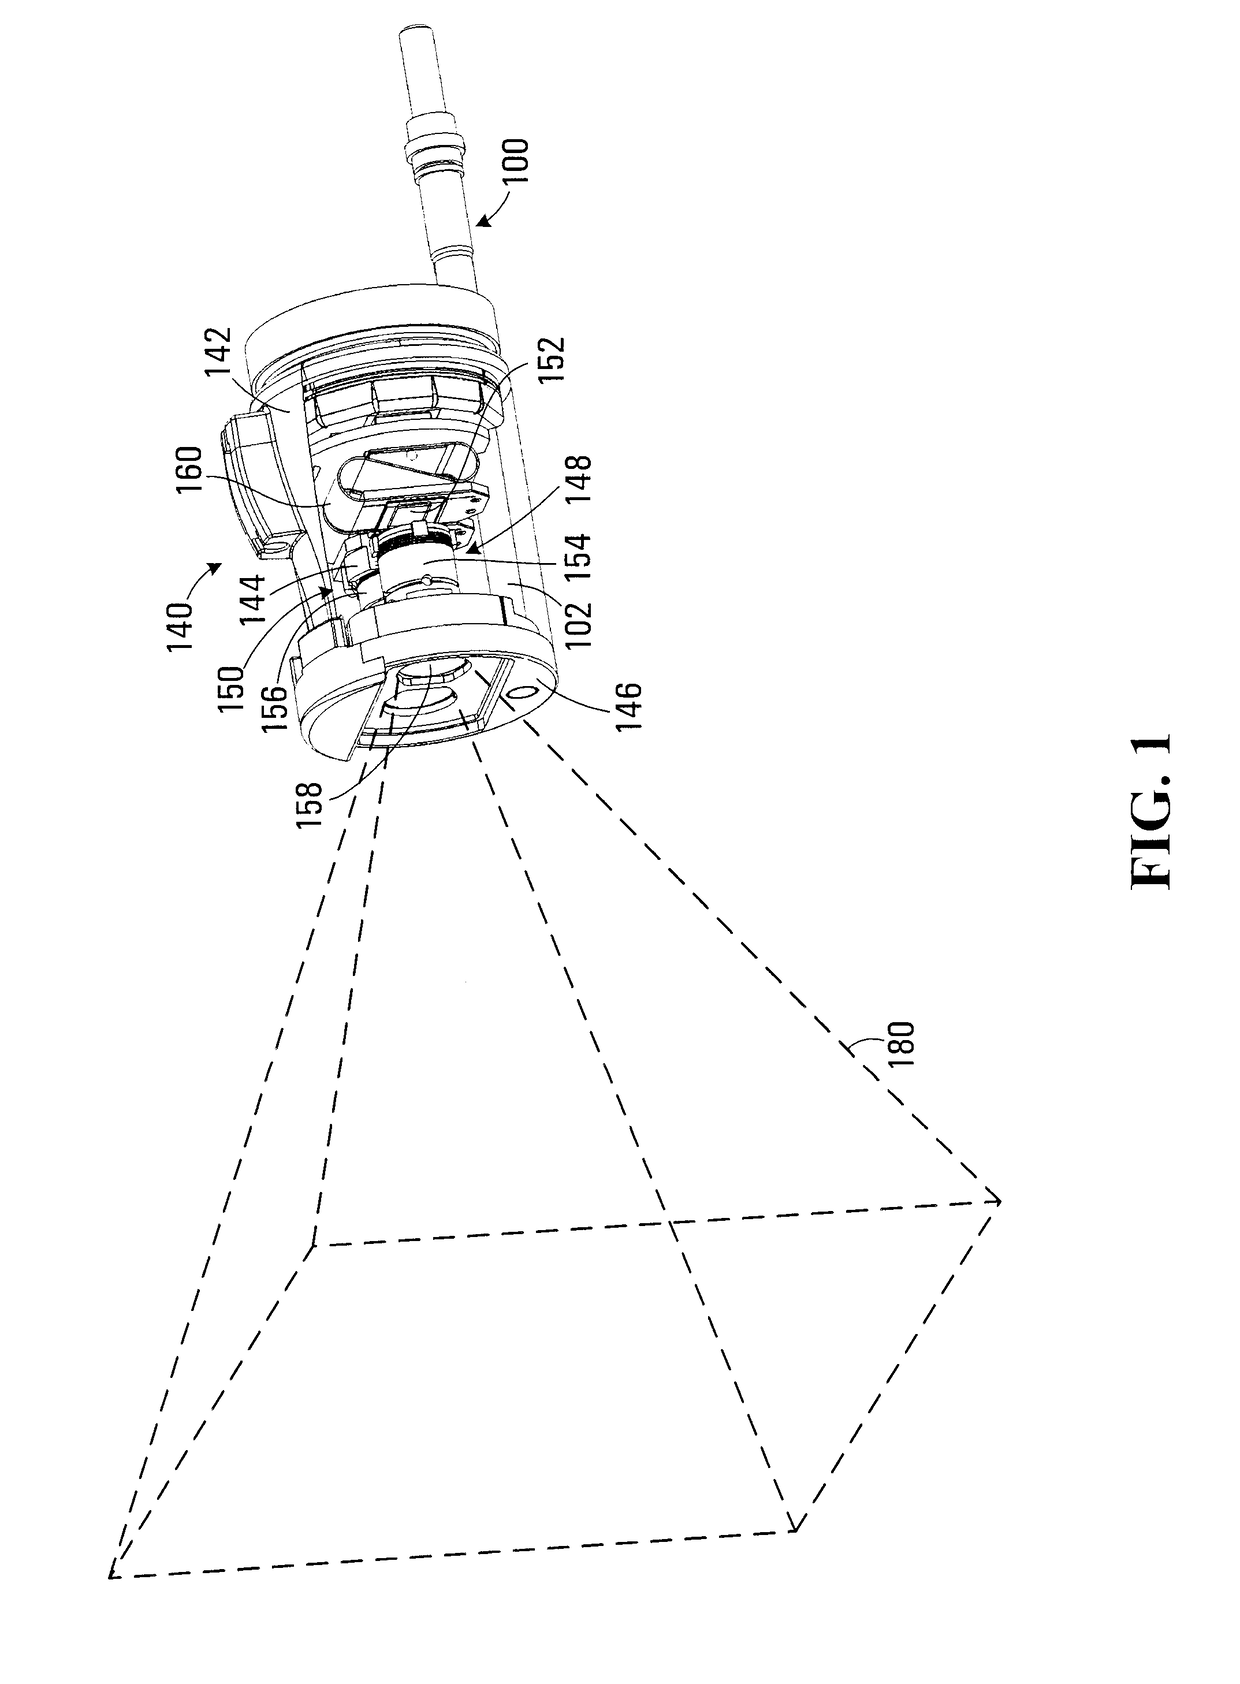 Method and apparatus for illuminating an object field imaged by a rectangular image sensor